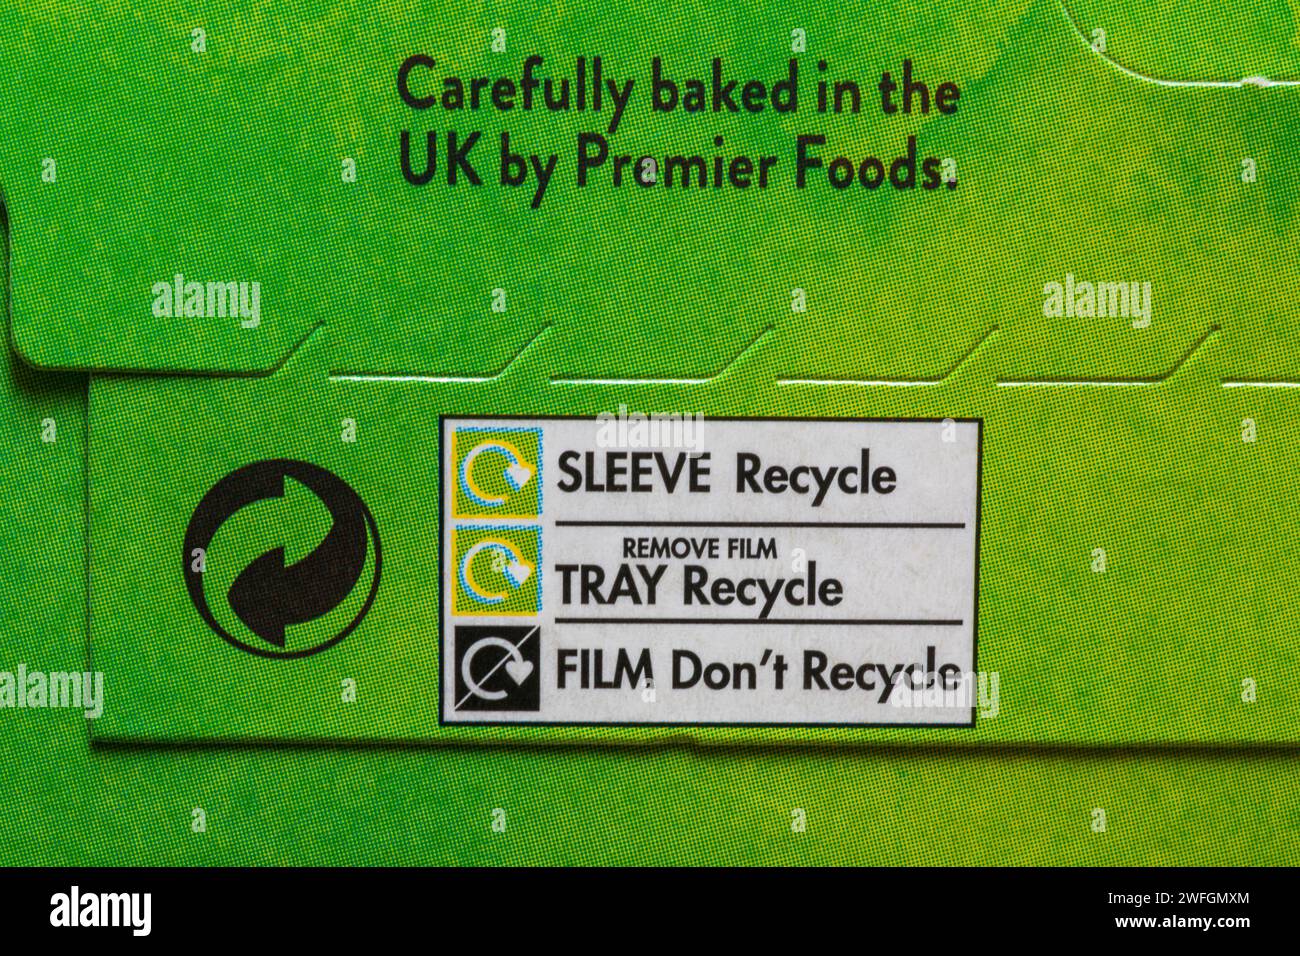 Disposal information on food packaging - sleeve recycle, tray recycle, film don't recycle  - disposal recycling recycle logo symbol Stock Photo